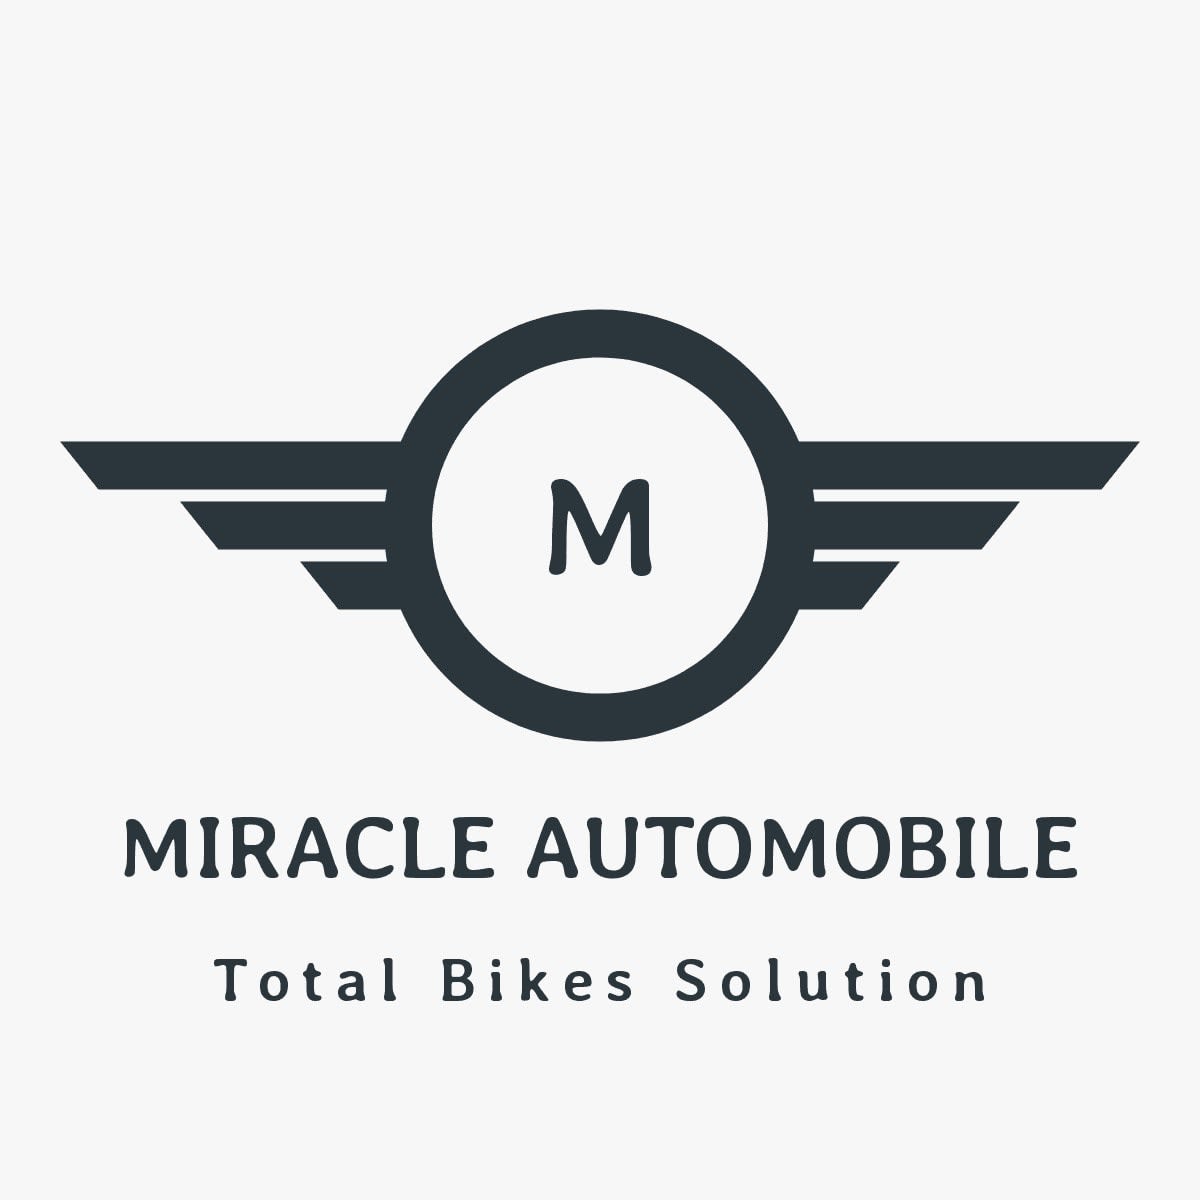 Miracle Automobile